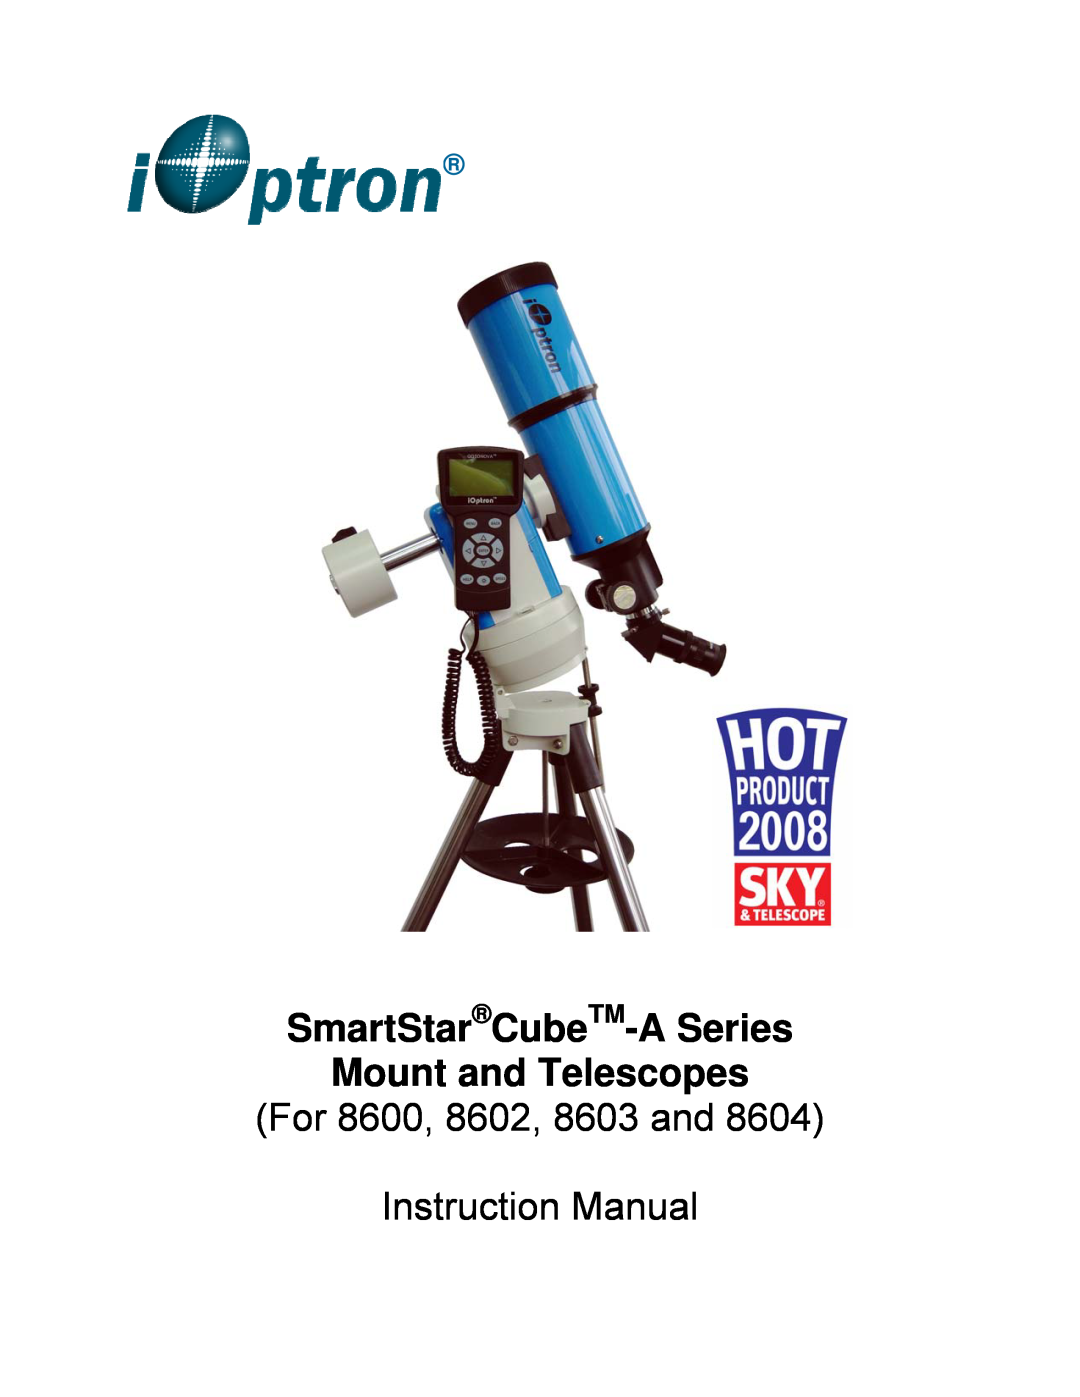 iOptron instruction manual SmartStarCubeTM-ASeries Mount and Telescopes, For 8600, 8602, 8603 and Instruction Manual 